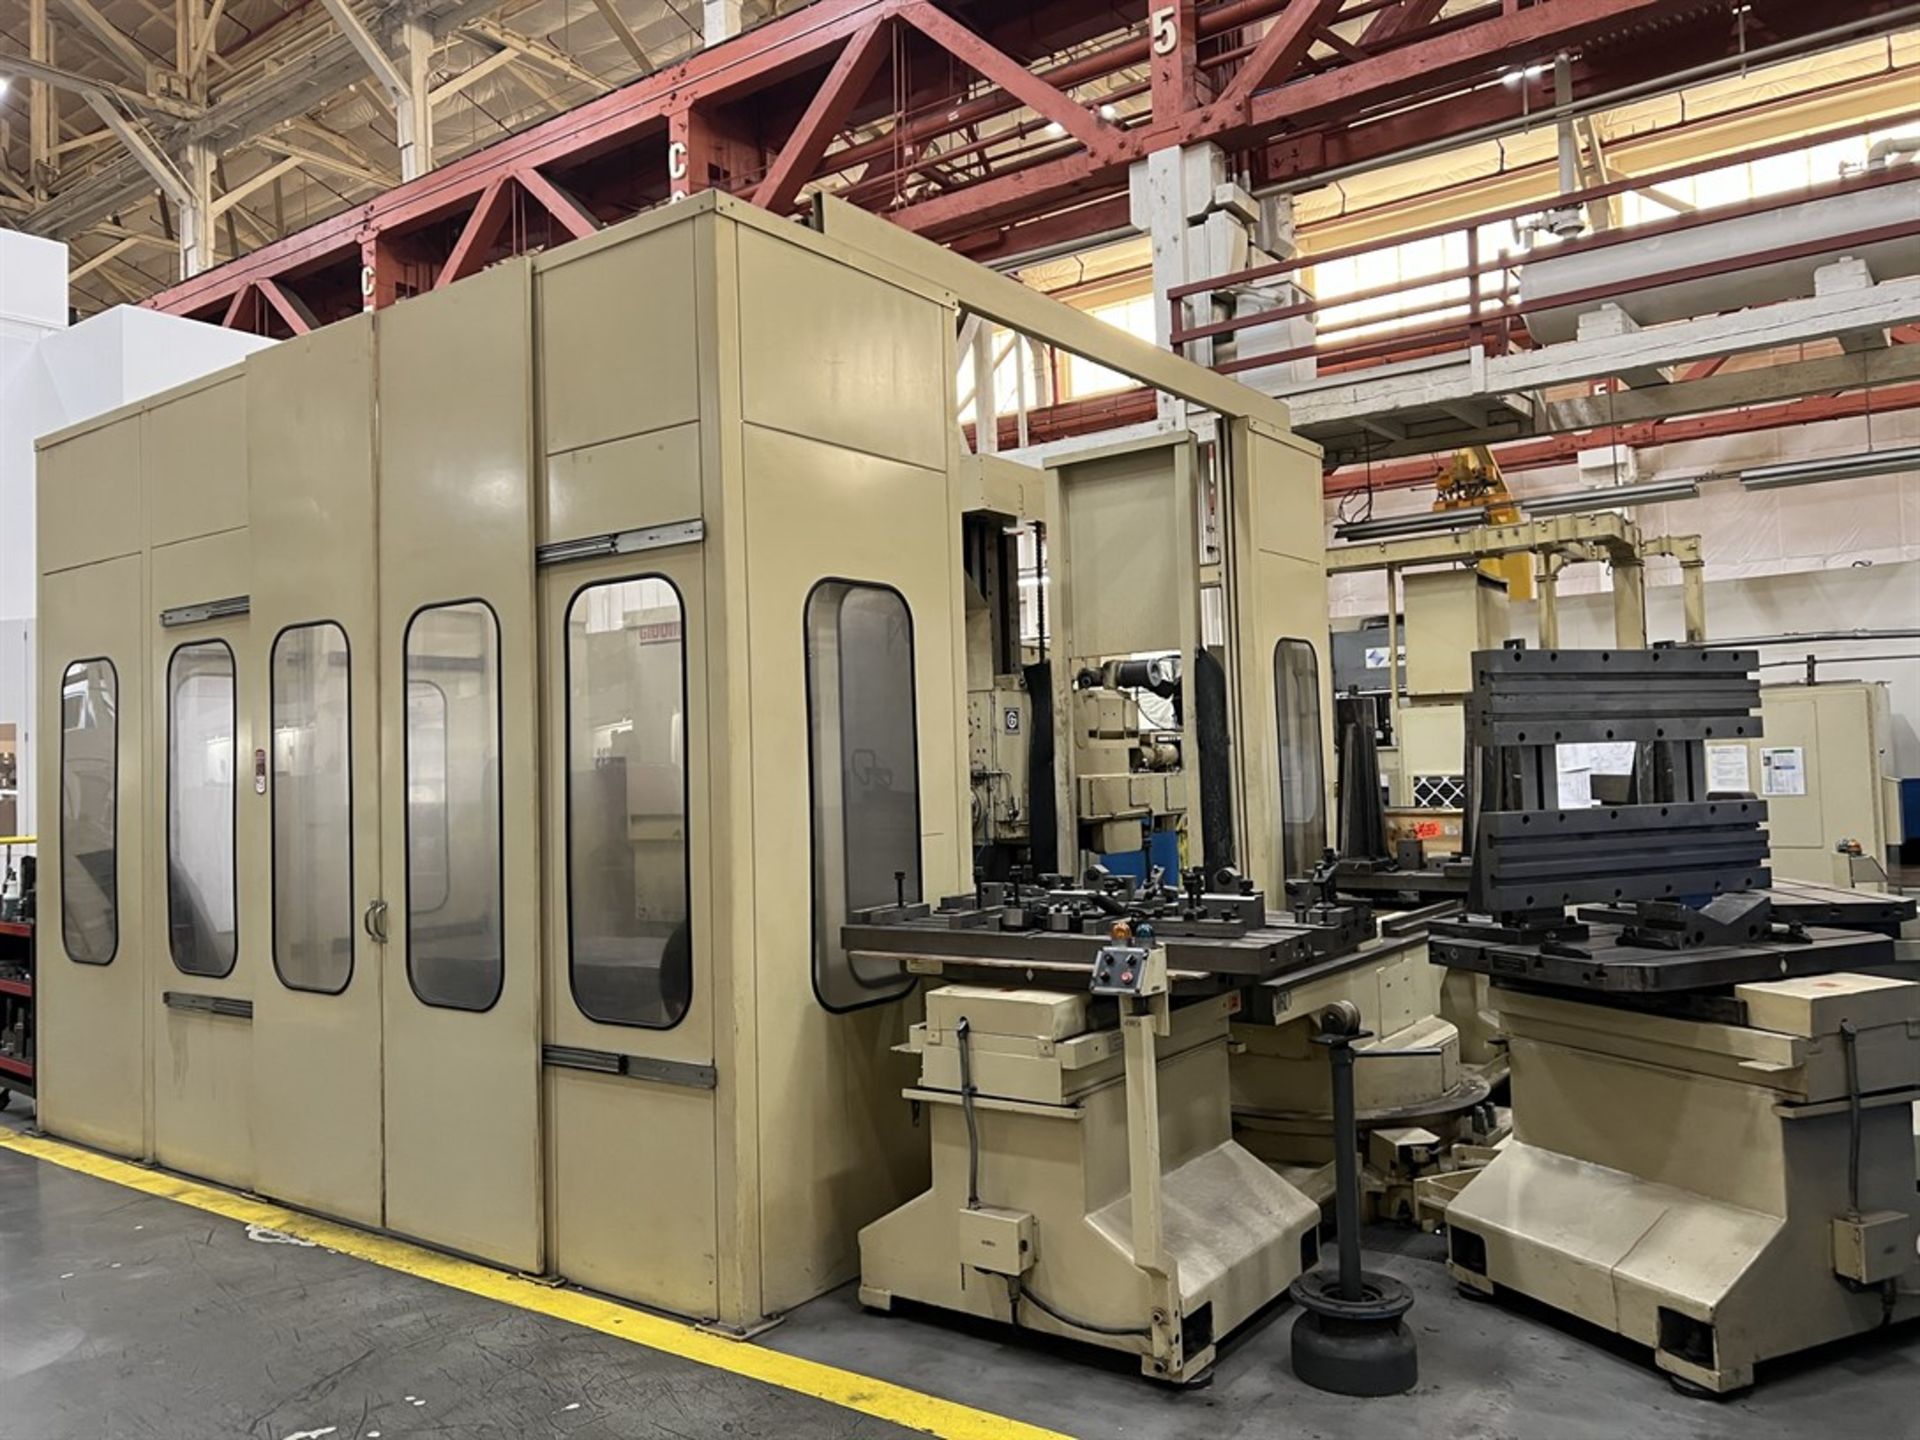 GIDDINGS & LEWIS MC-60 S Horizontal Machining Center, s/n 450-172-86, G & L 8000 Control, 6” Spindle